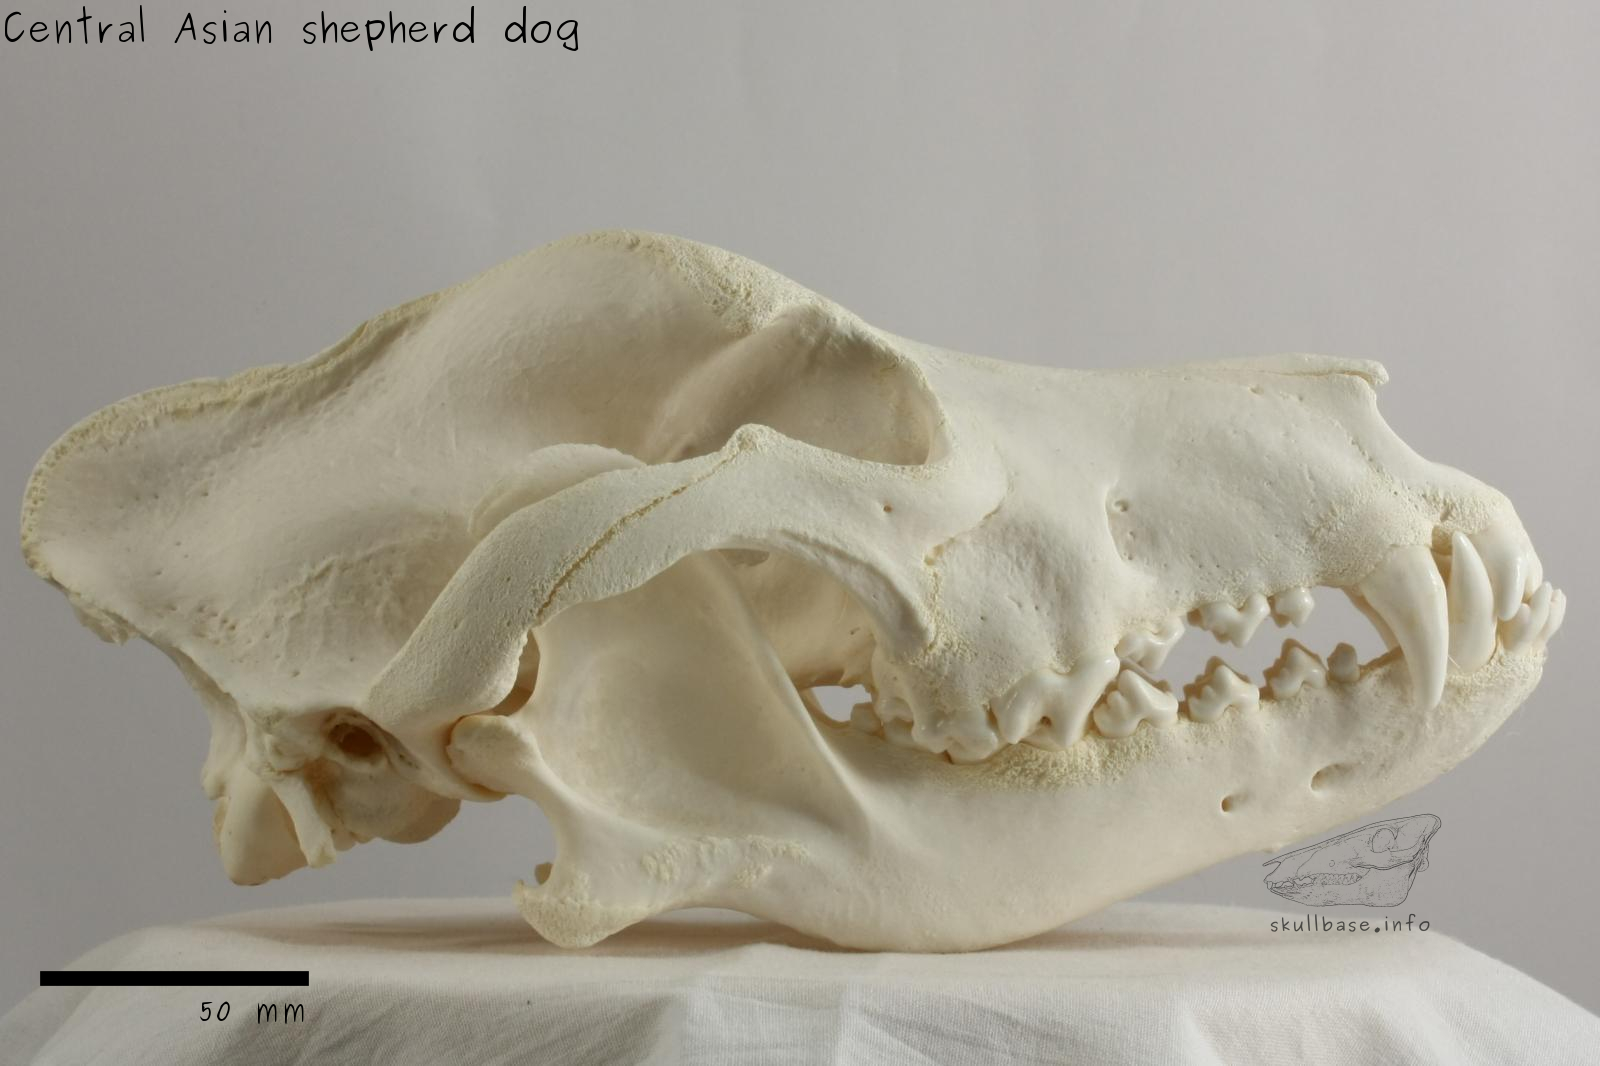 Central Asian shepherd dog (Canis lupus familiaris) skull lateral view